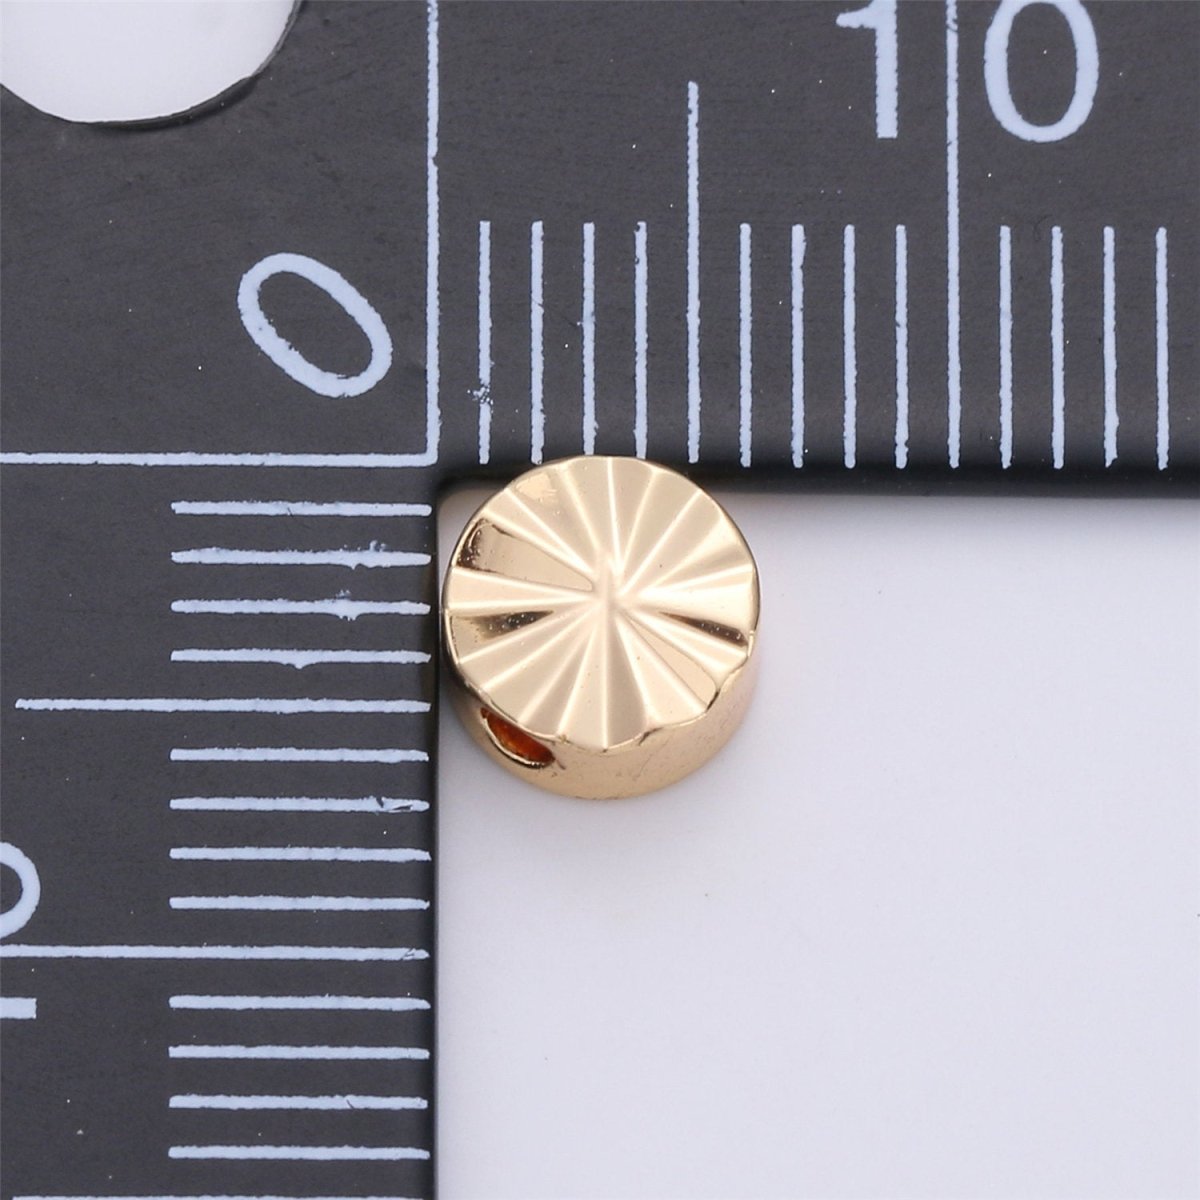 6mm Shiny Gold Plated Round Circler Flower Beads for bracelet spacer Jewelry Making Supply small hole beads B-223 - DLUXCA